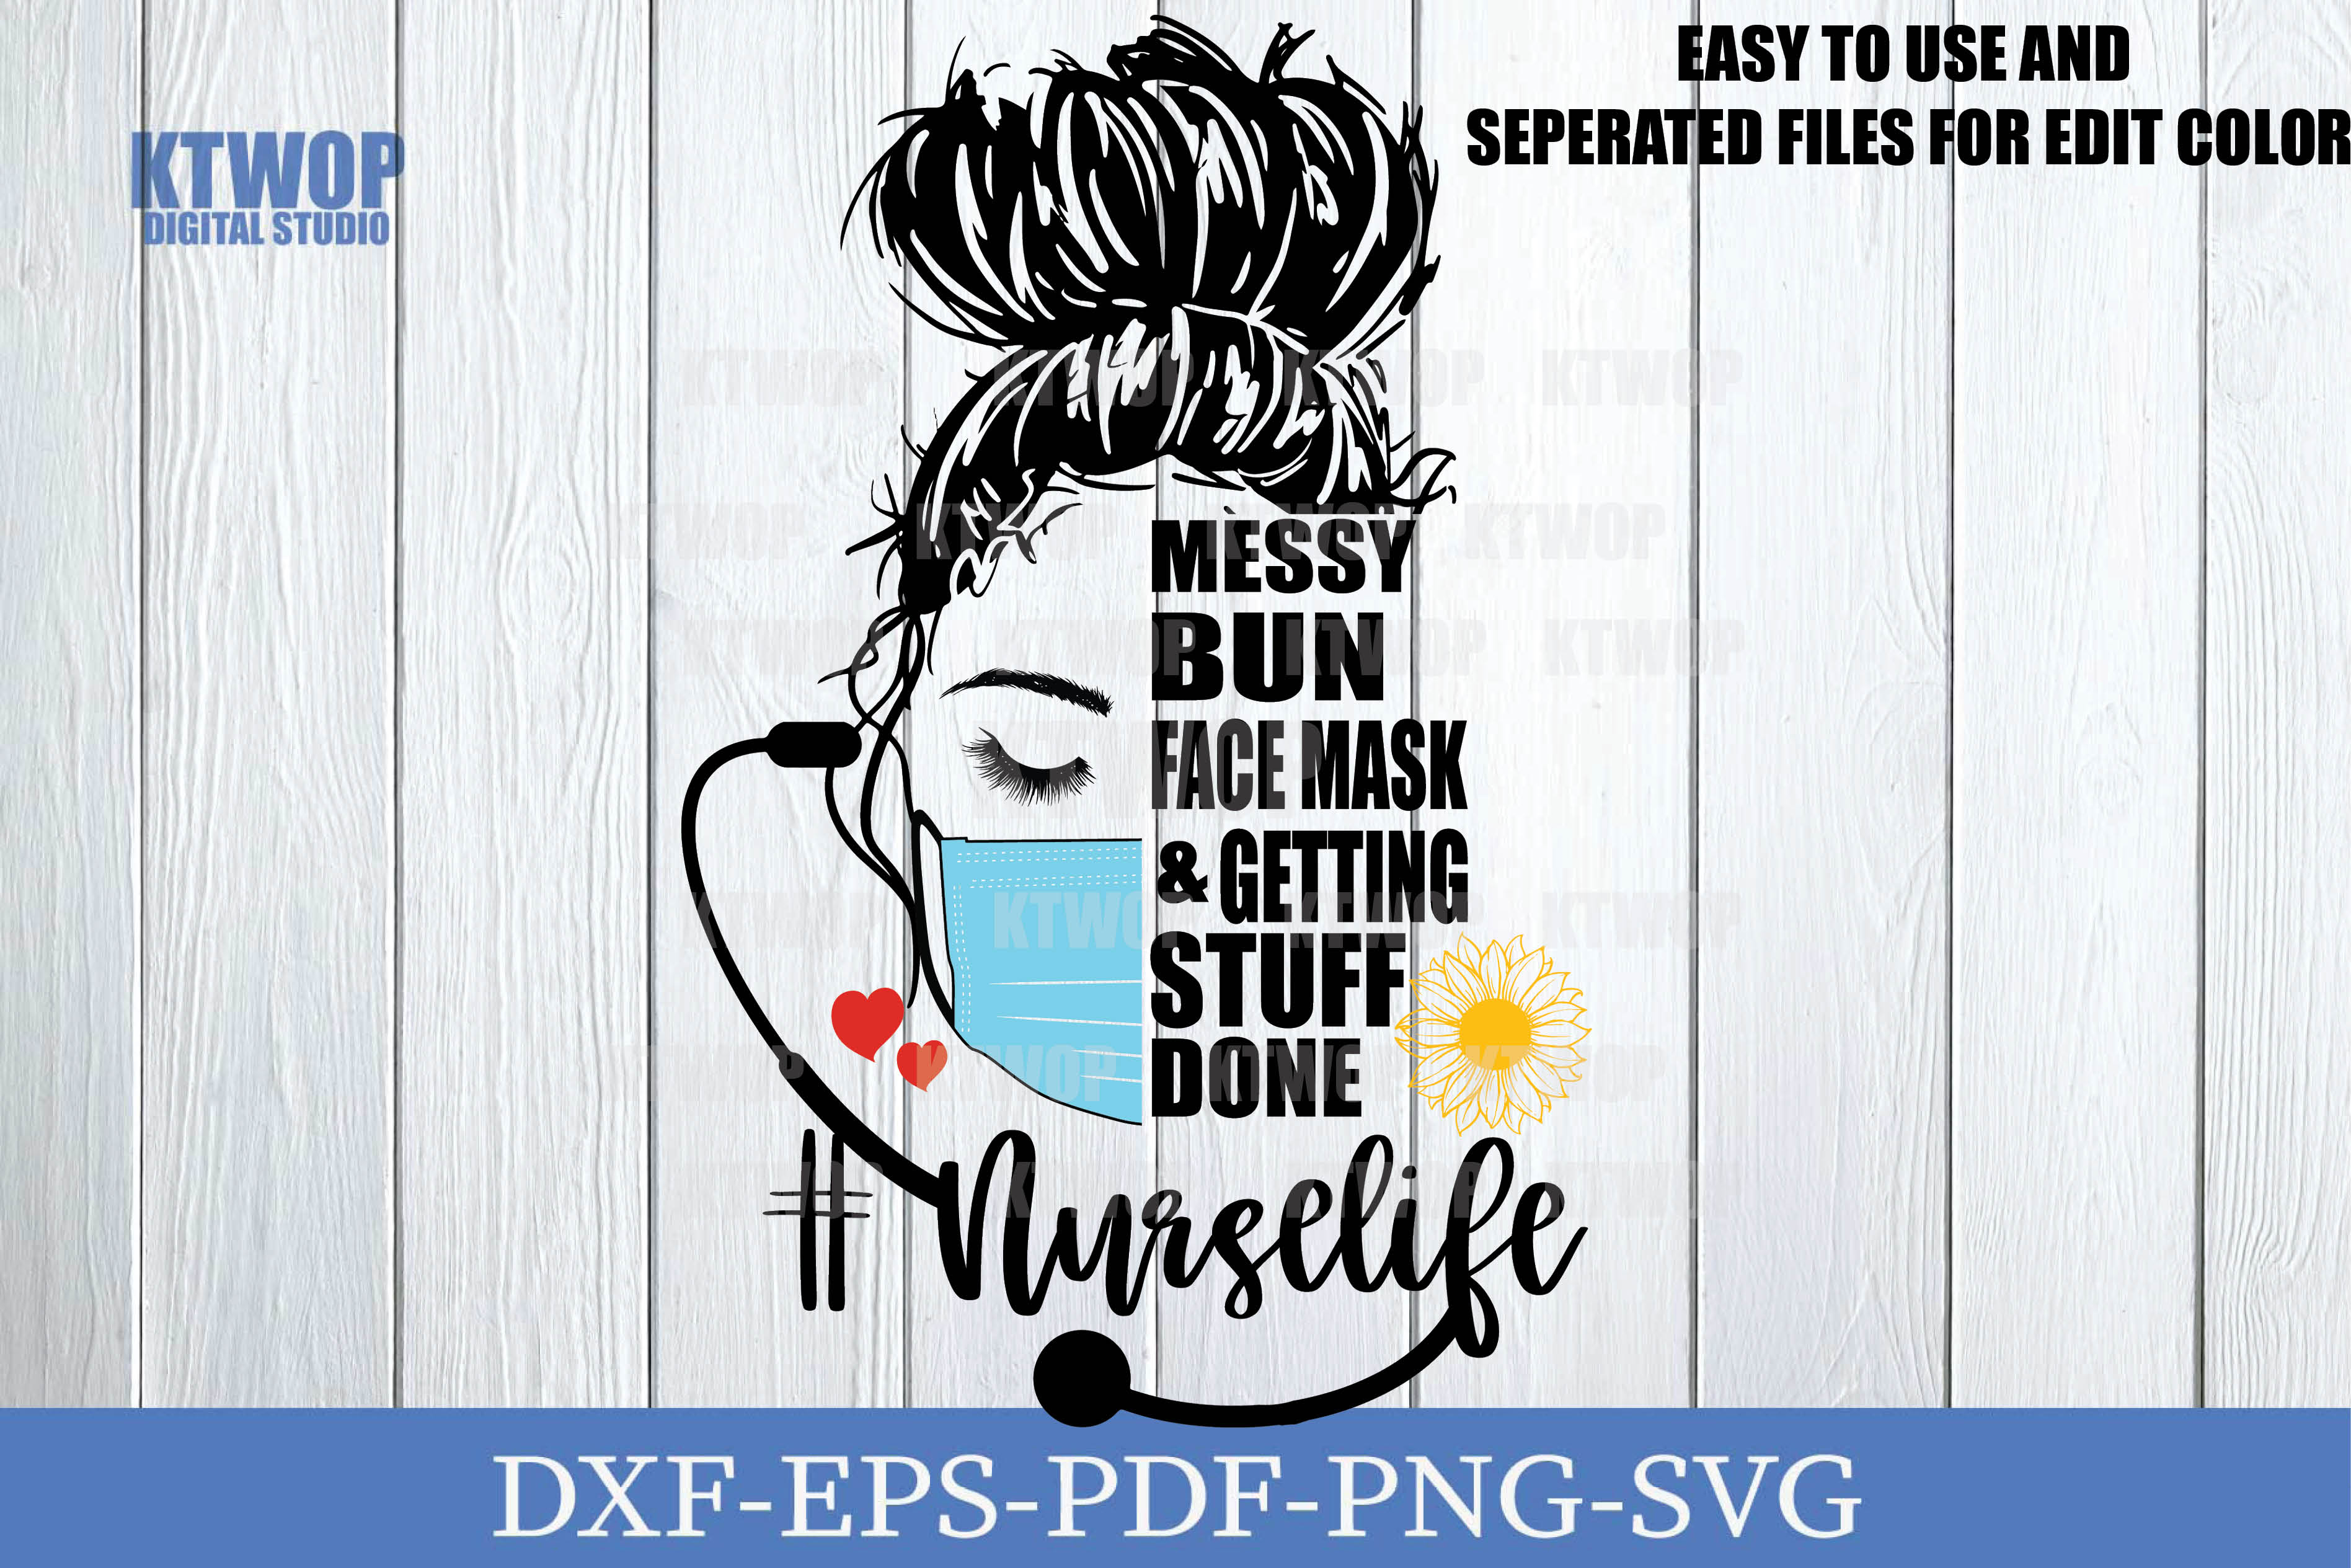 Nurselife Messy Bun Face Mask And Getting Stuff Done Gráfico Por Ktwop